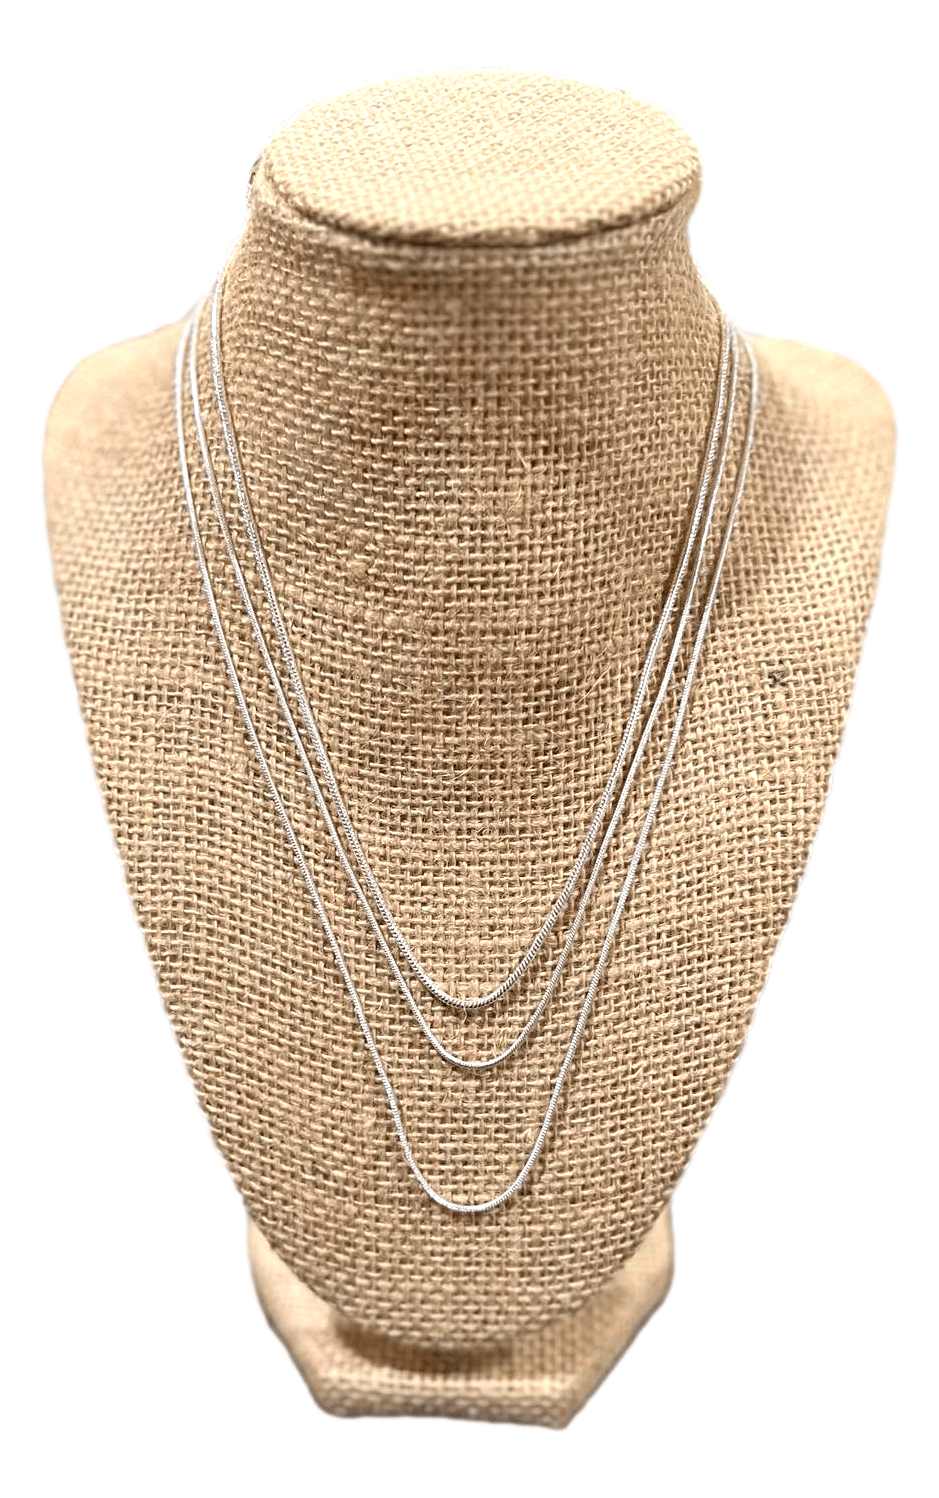 Sterling Silver .925 Round Snake Chains 16, 18, and 20 inch Size Options - Ysleta Mission Gift Shop- VOTED El Paso's Best Gift Shop